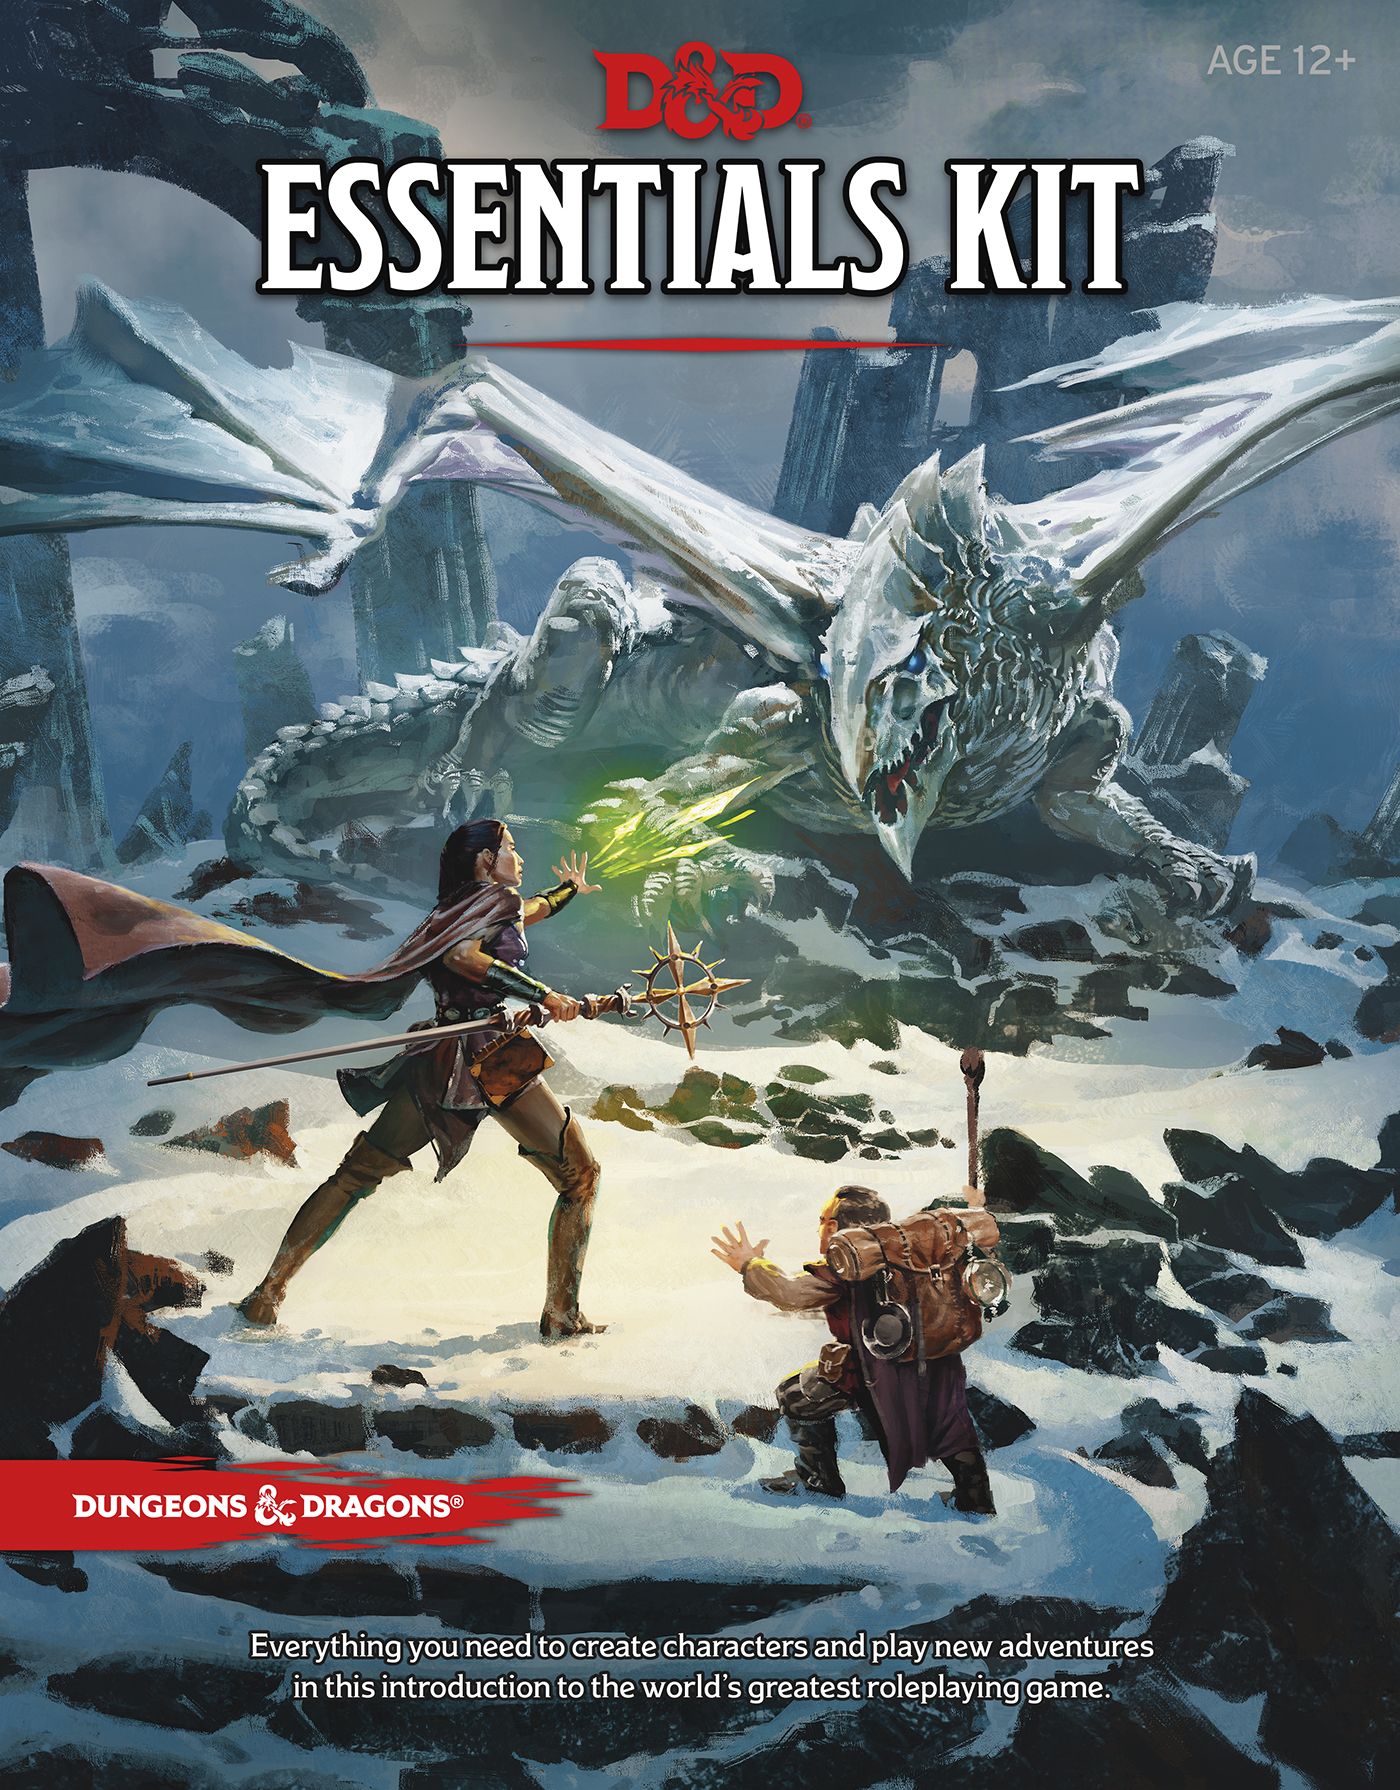 D&D: Continue The Adventure In The Essentials Kit With These D&D